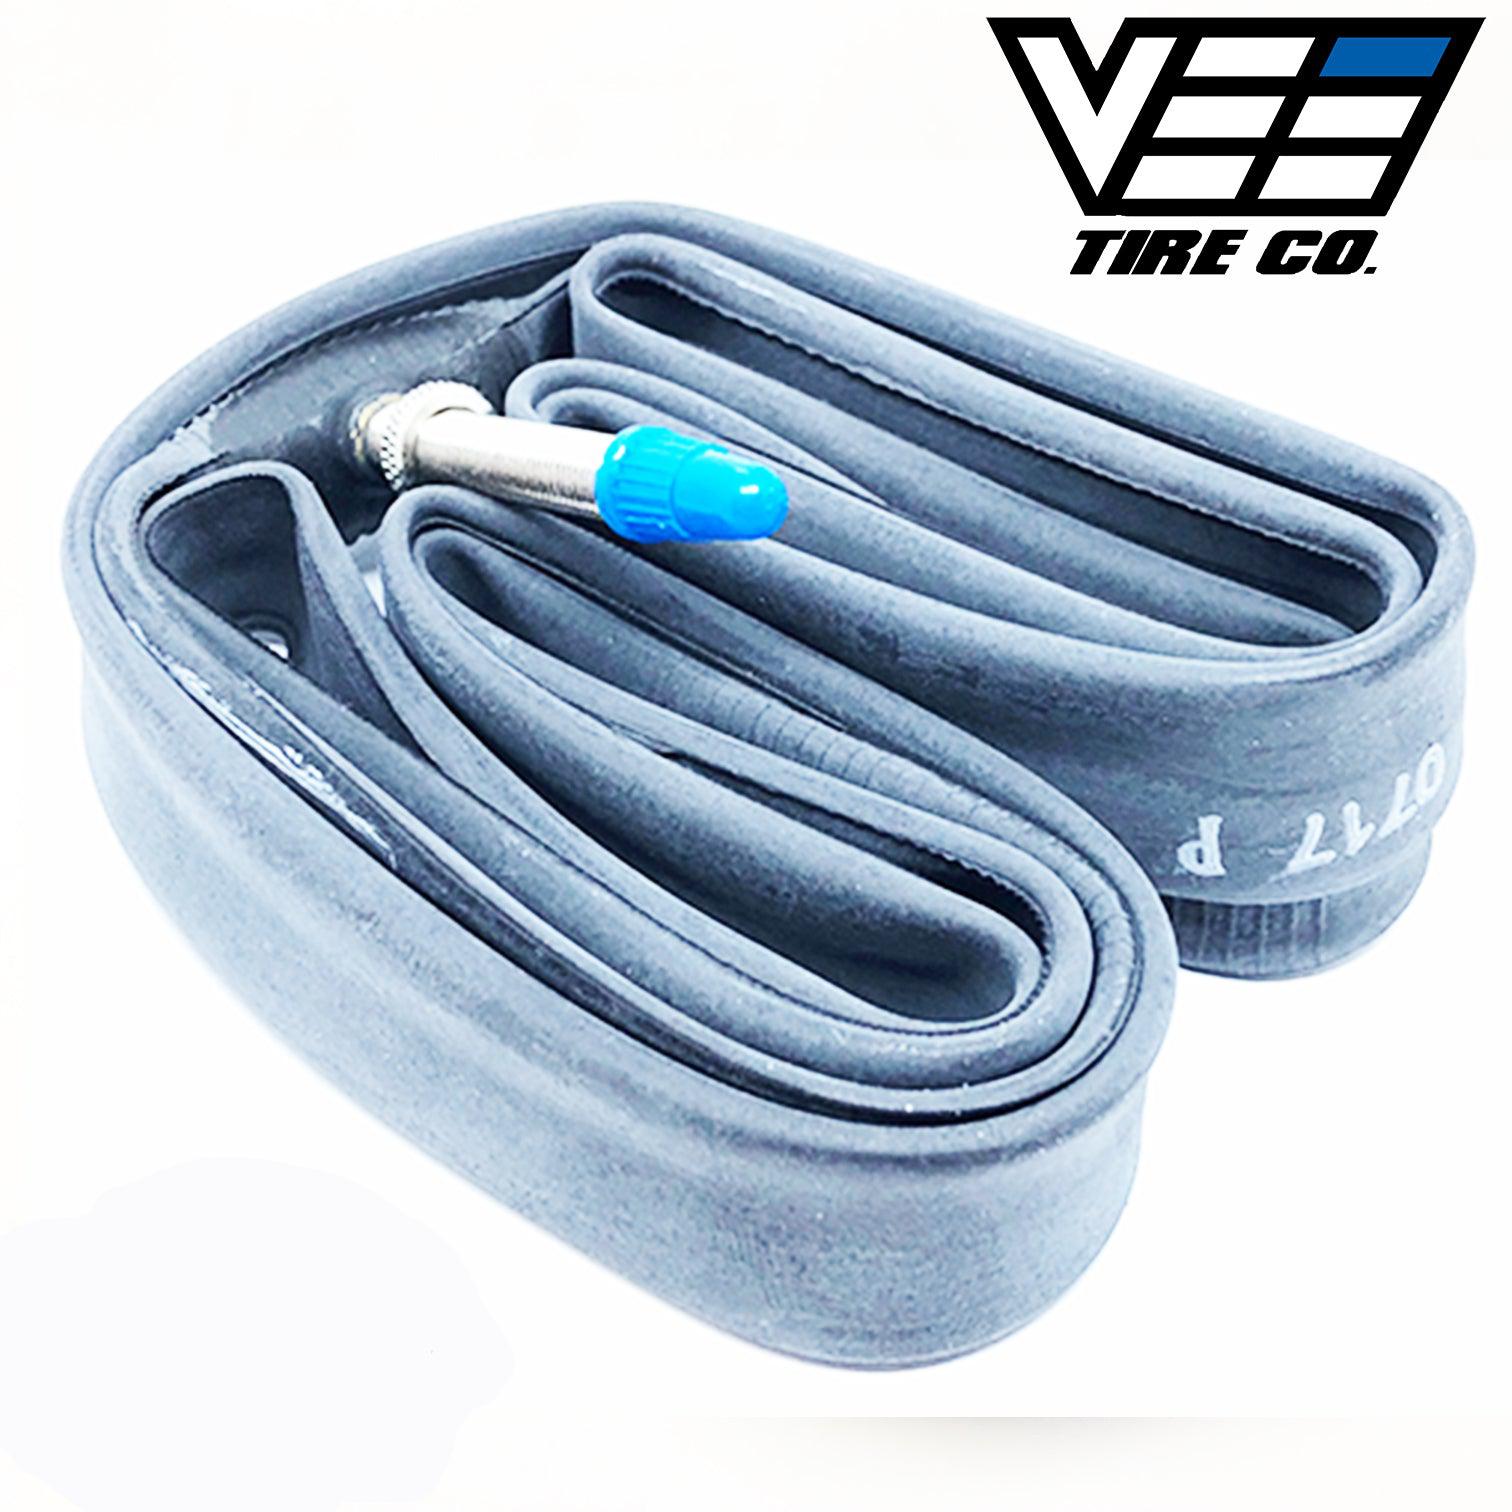 Vee tire co is a leading manufacturer of high-quality tires, specializing in Vee 20 X 1-1/8 Inch Tube (FV 48mm). With a wide range of tube options and valve stem designs, Vee tire co offers superior performance and durability.